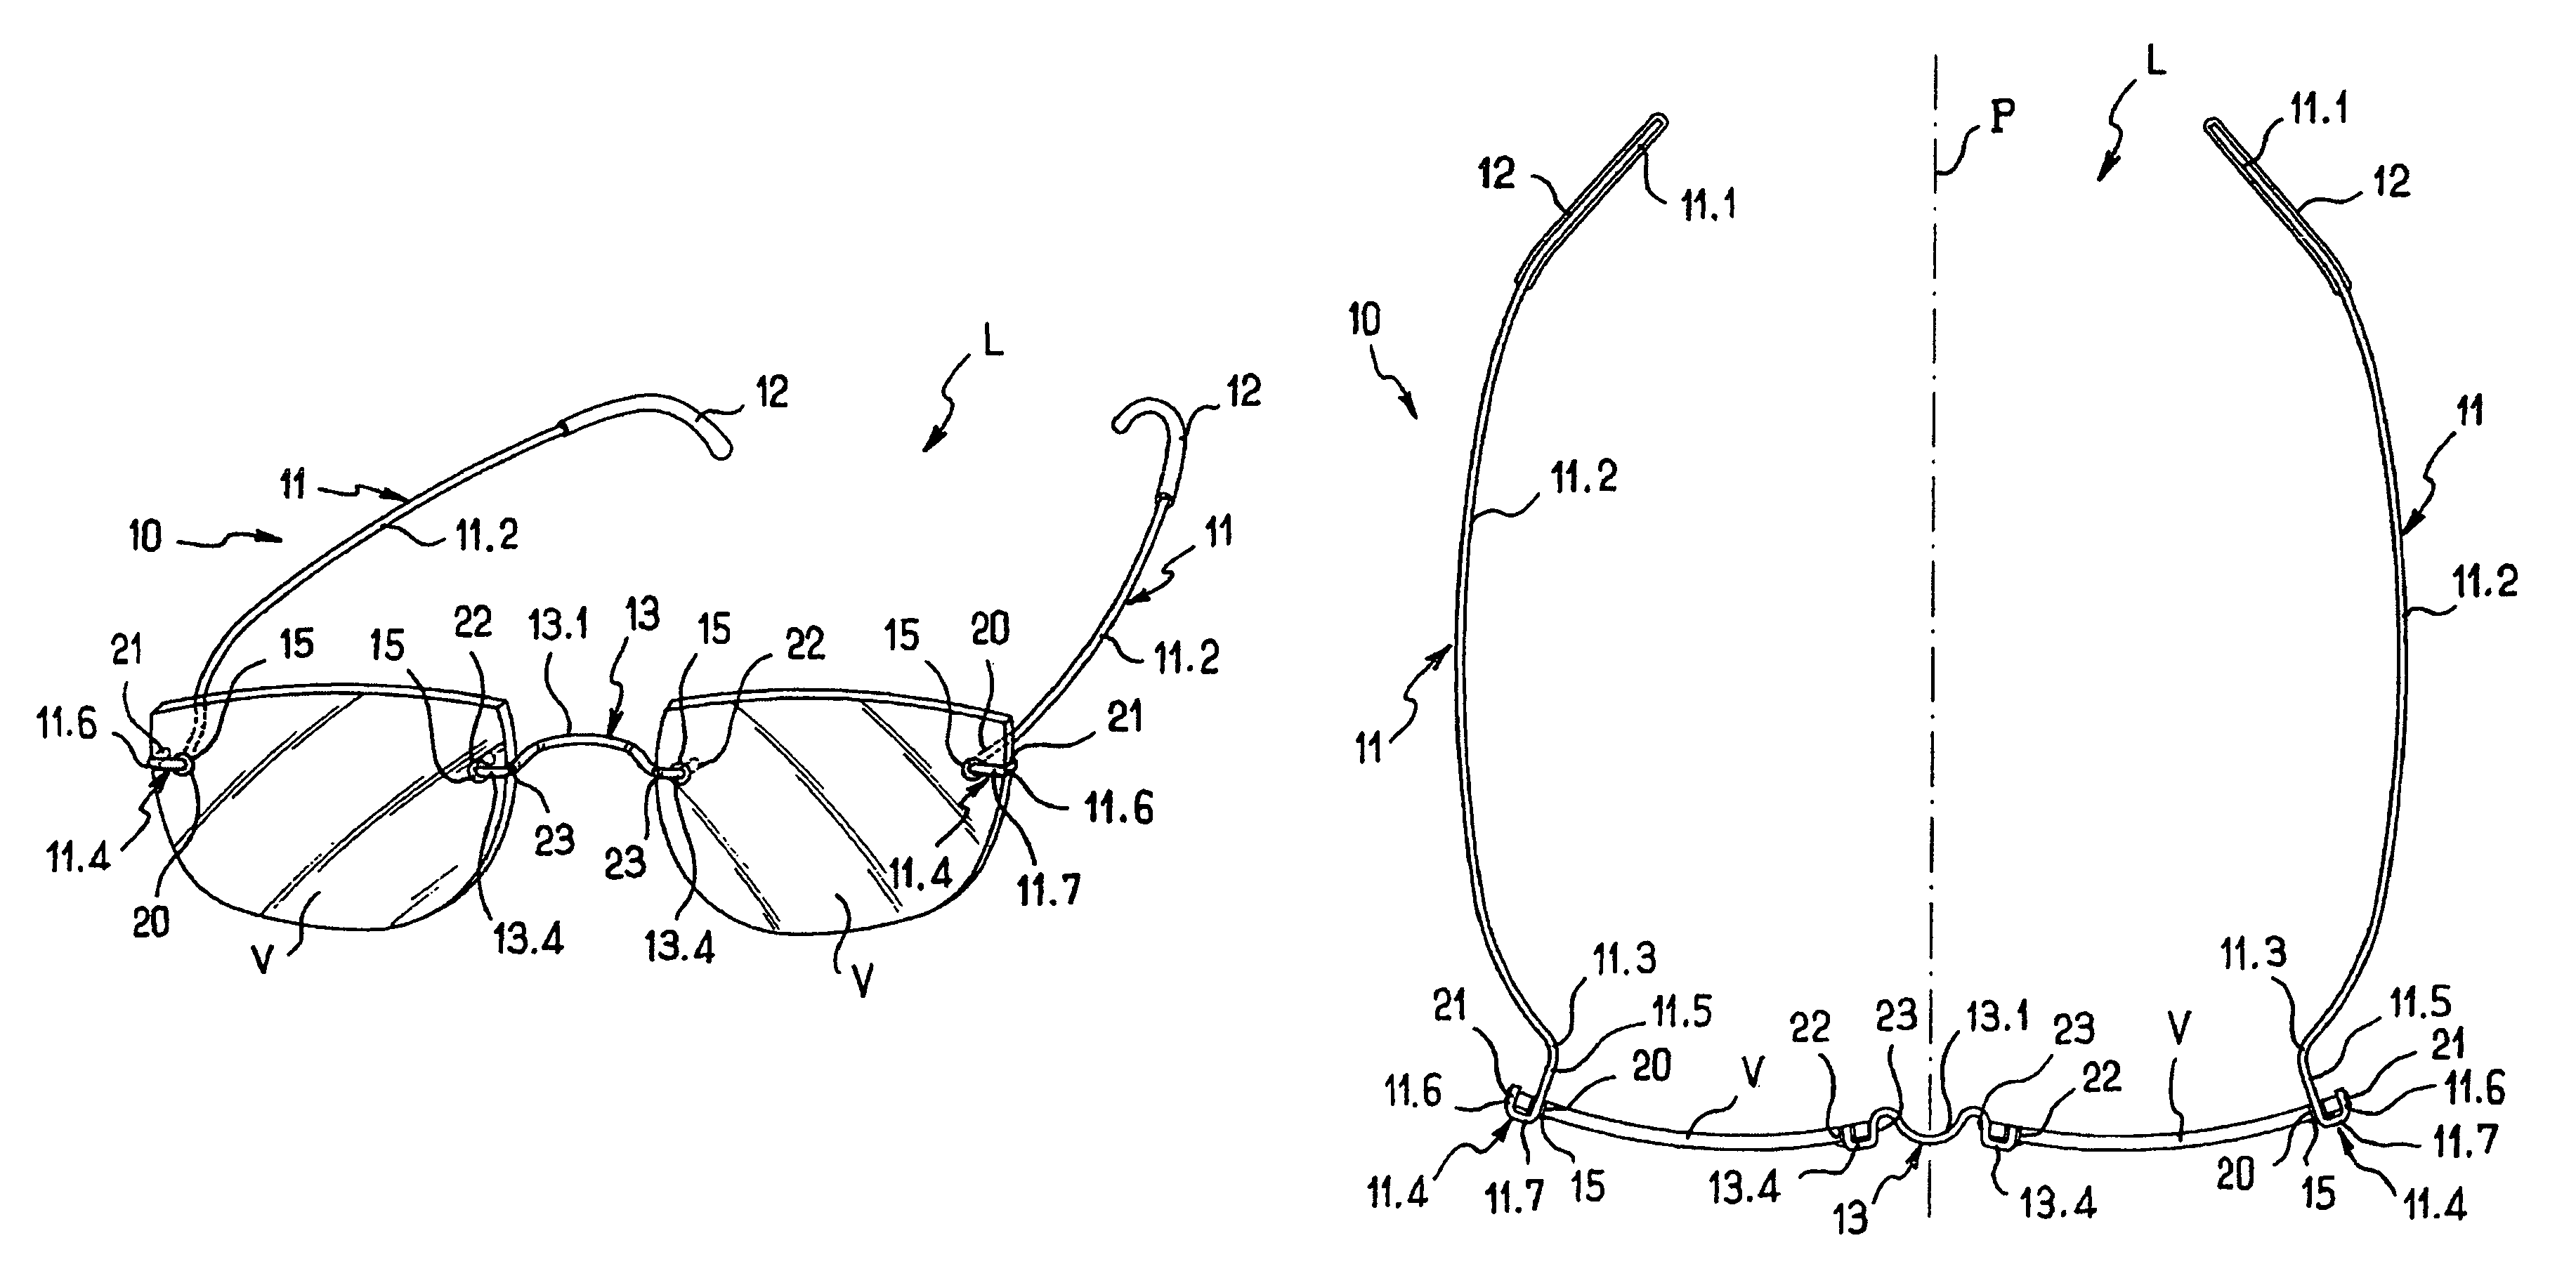 Spectacles of the rimless type having hinge-less wire side-arms that are deformable in flexing